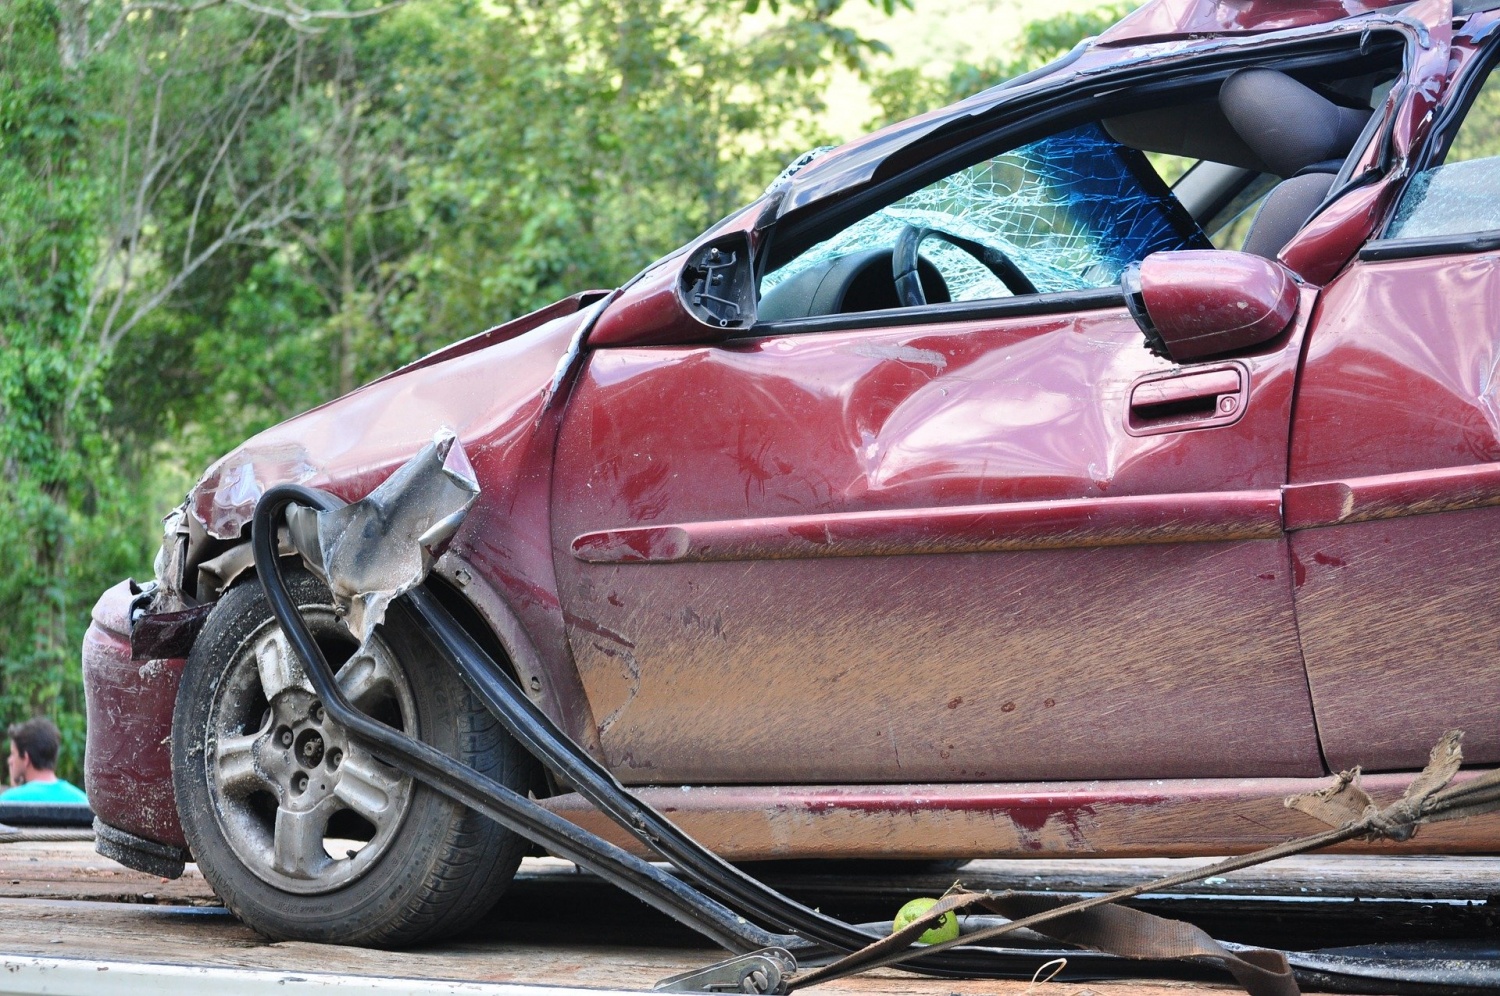 How Soon Should I Contact My Lawyer After My Car Accident?